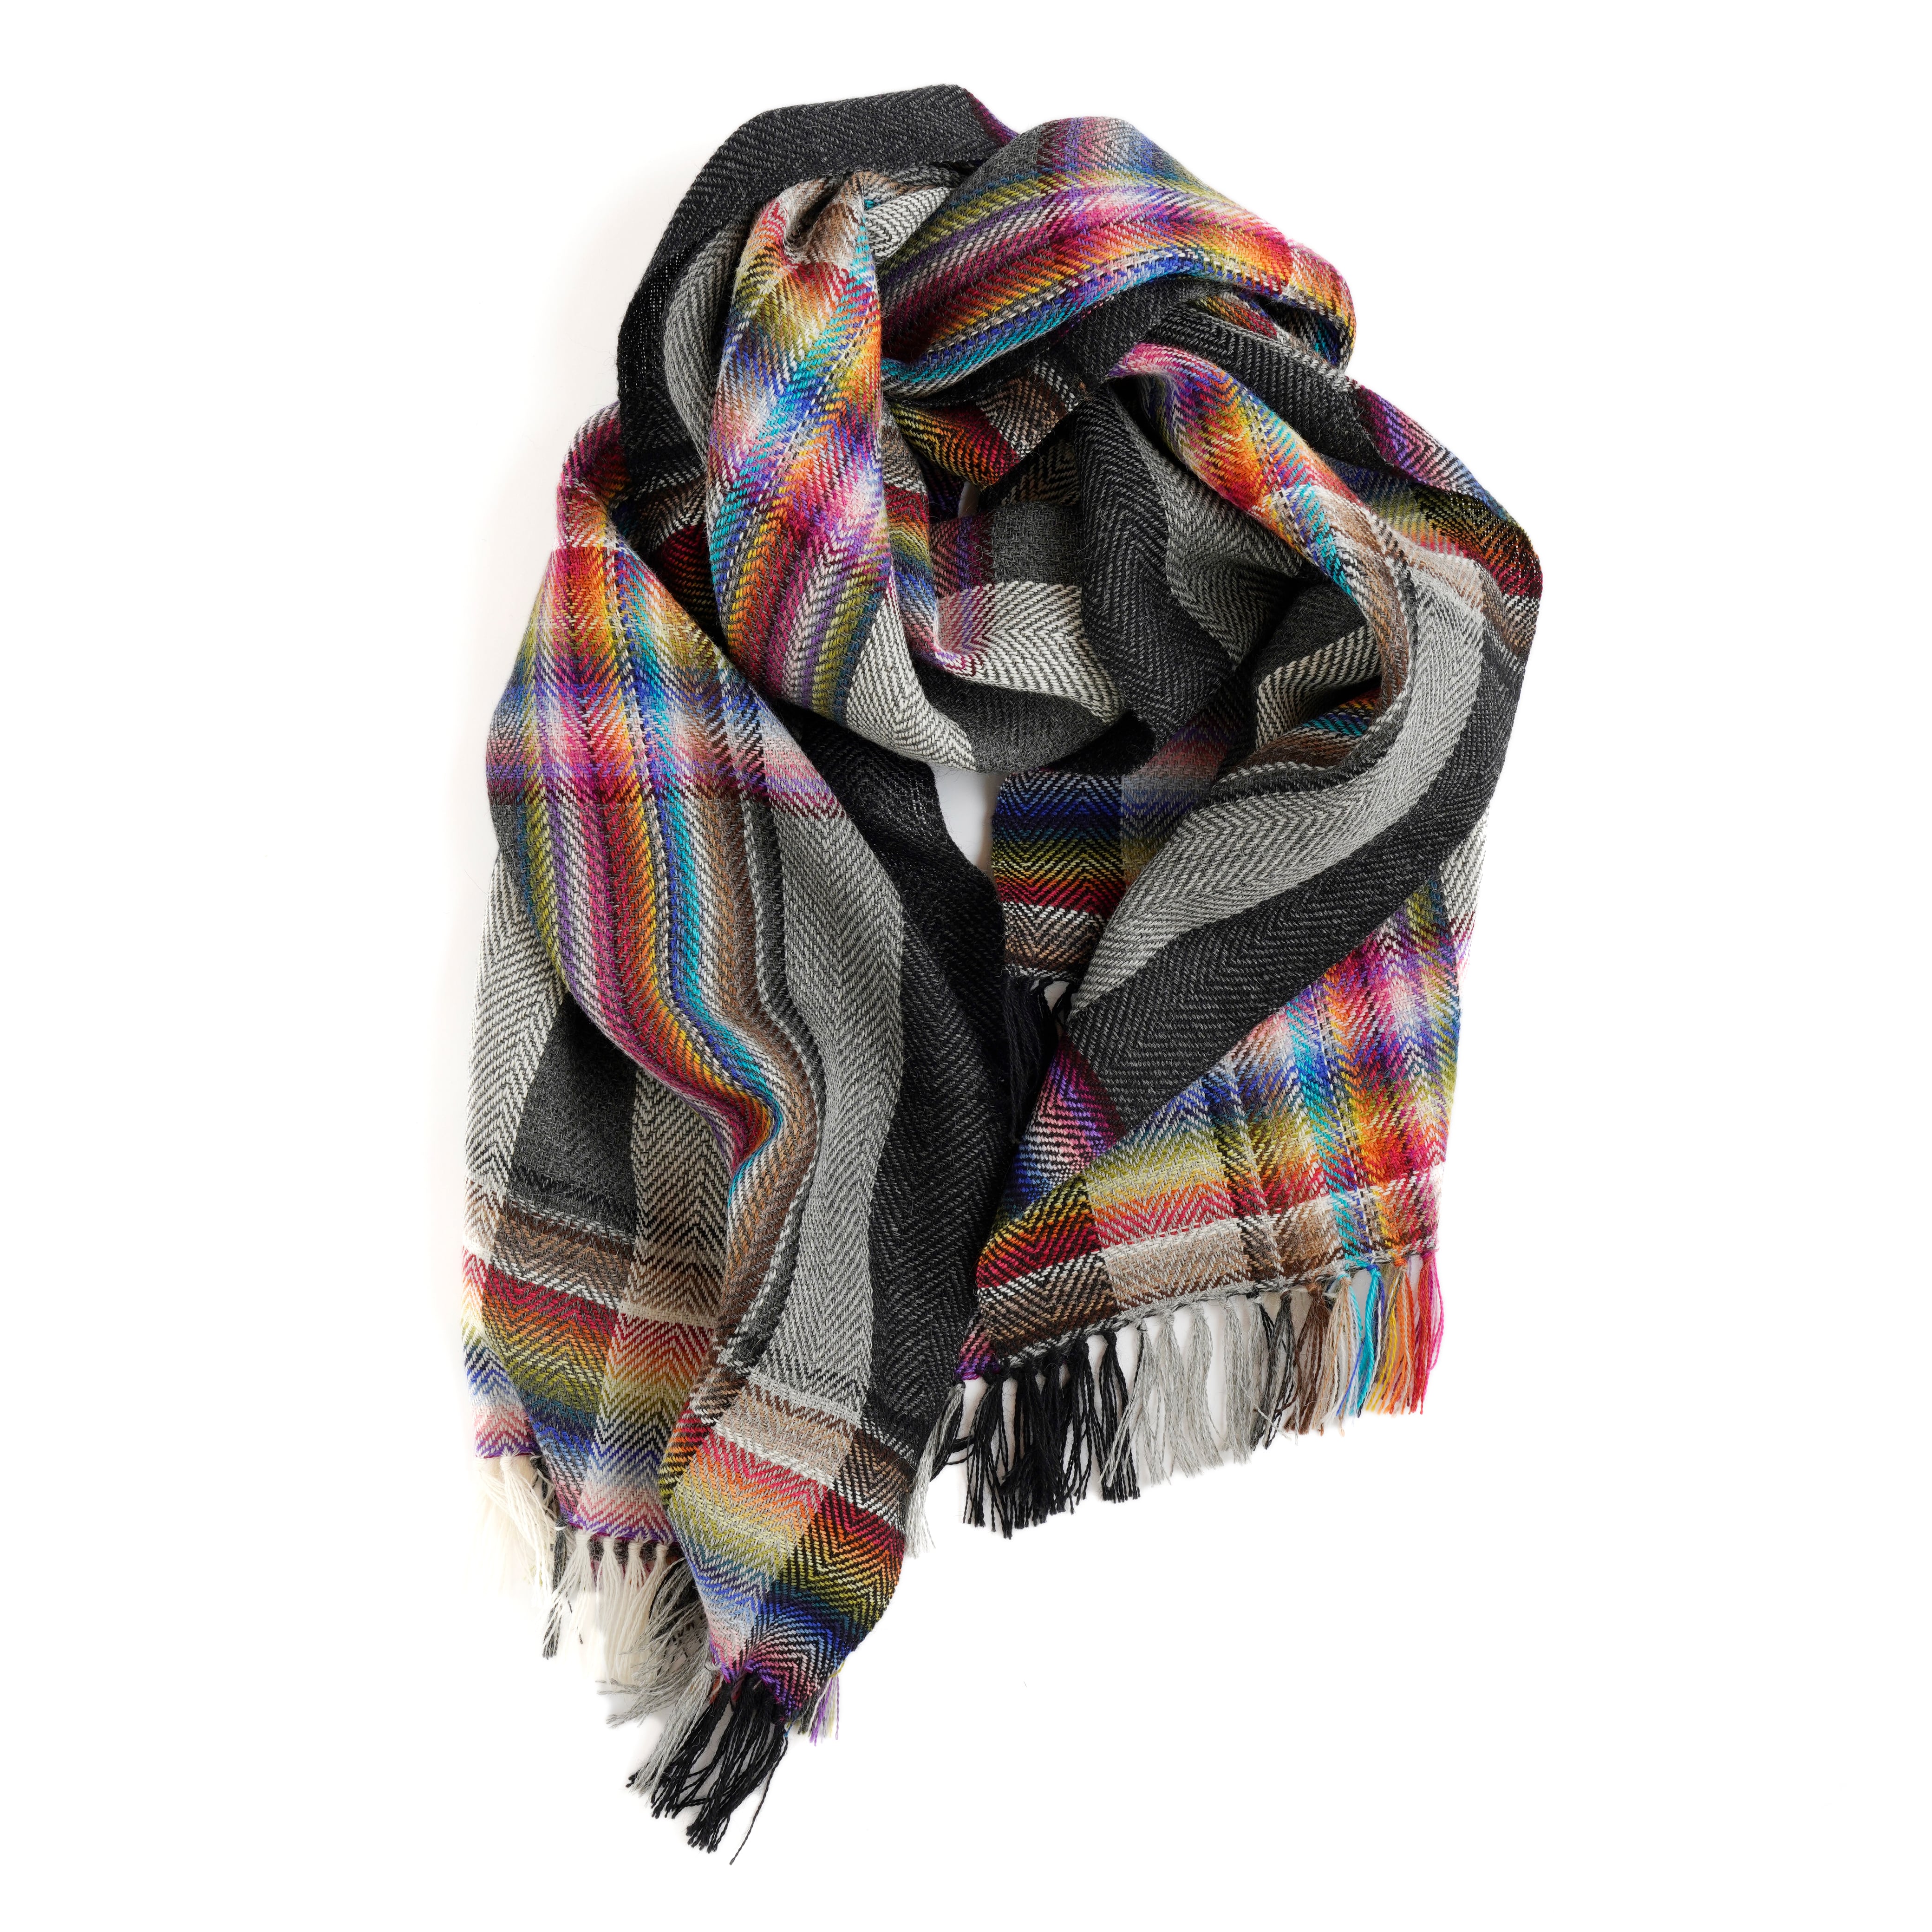 THE INOUE BROTHERS／Multi Coloured Scarf／Grey